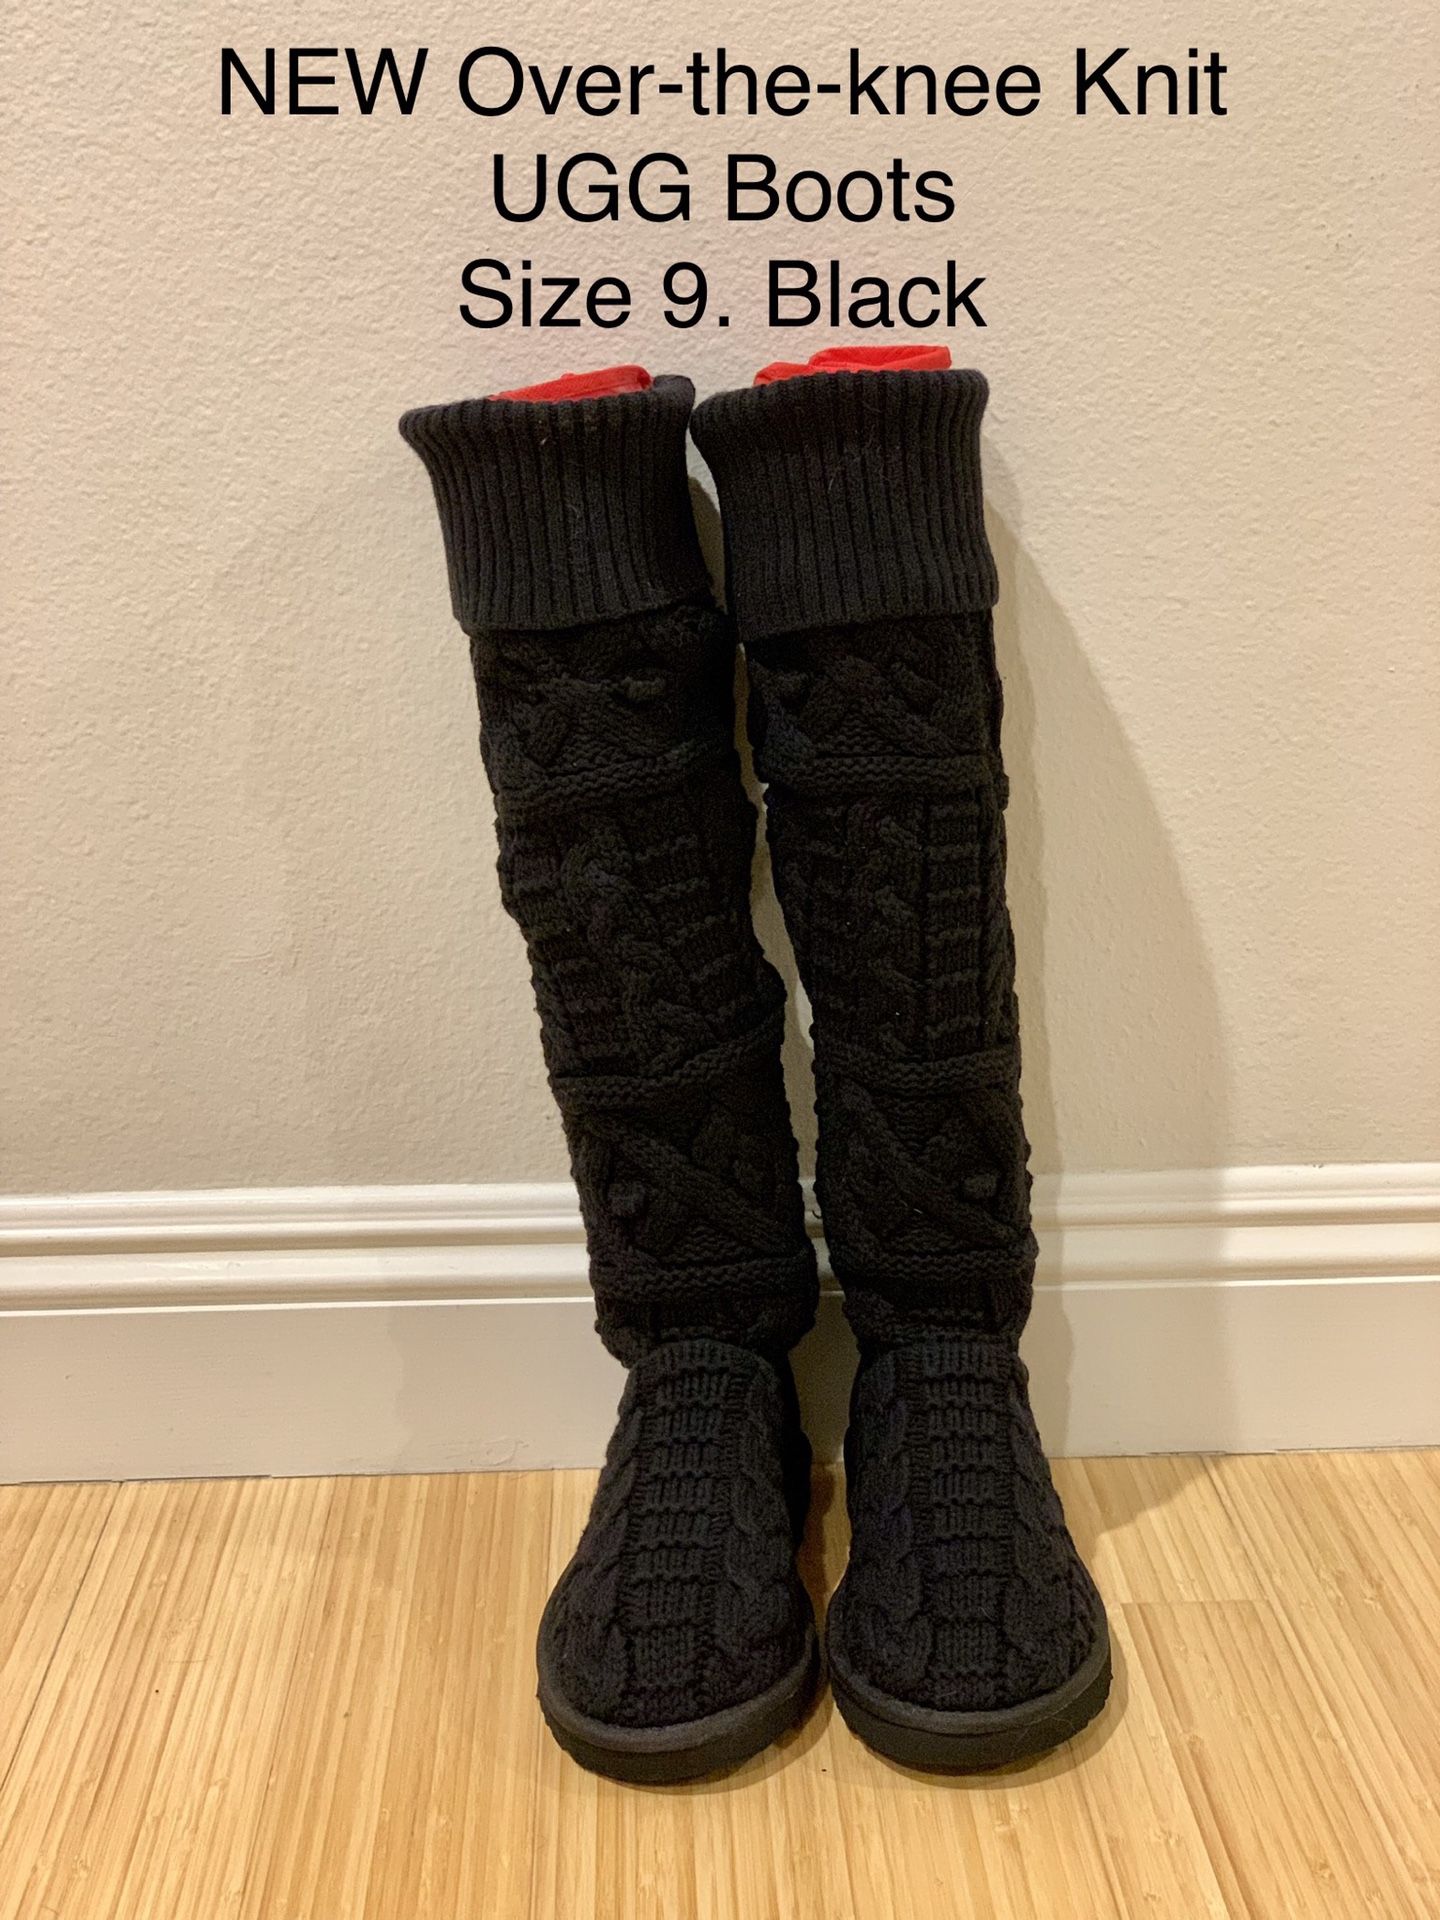 NEW Over-the-knee Knit UGG Boots. Size 9. Black